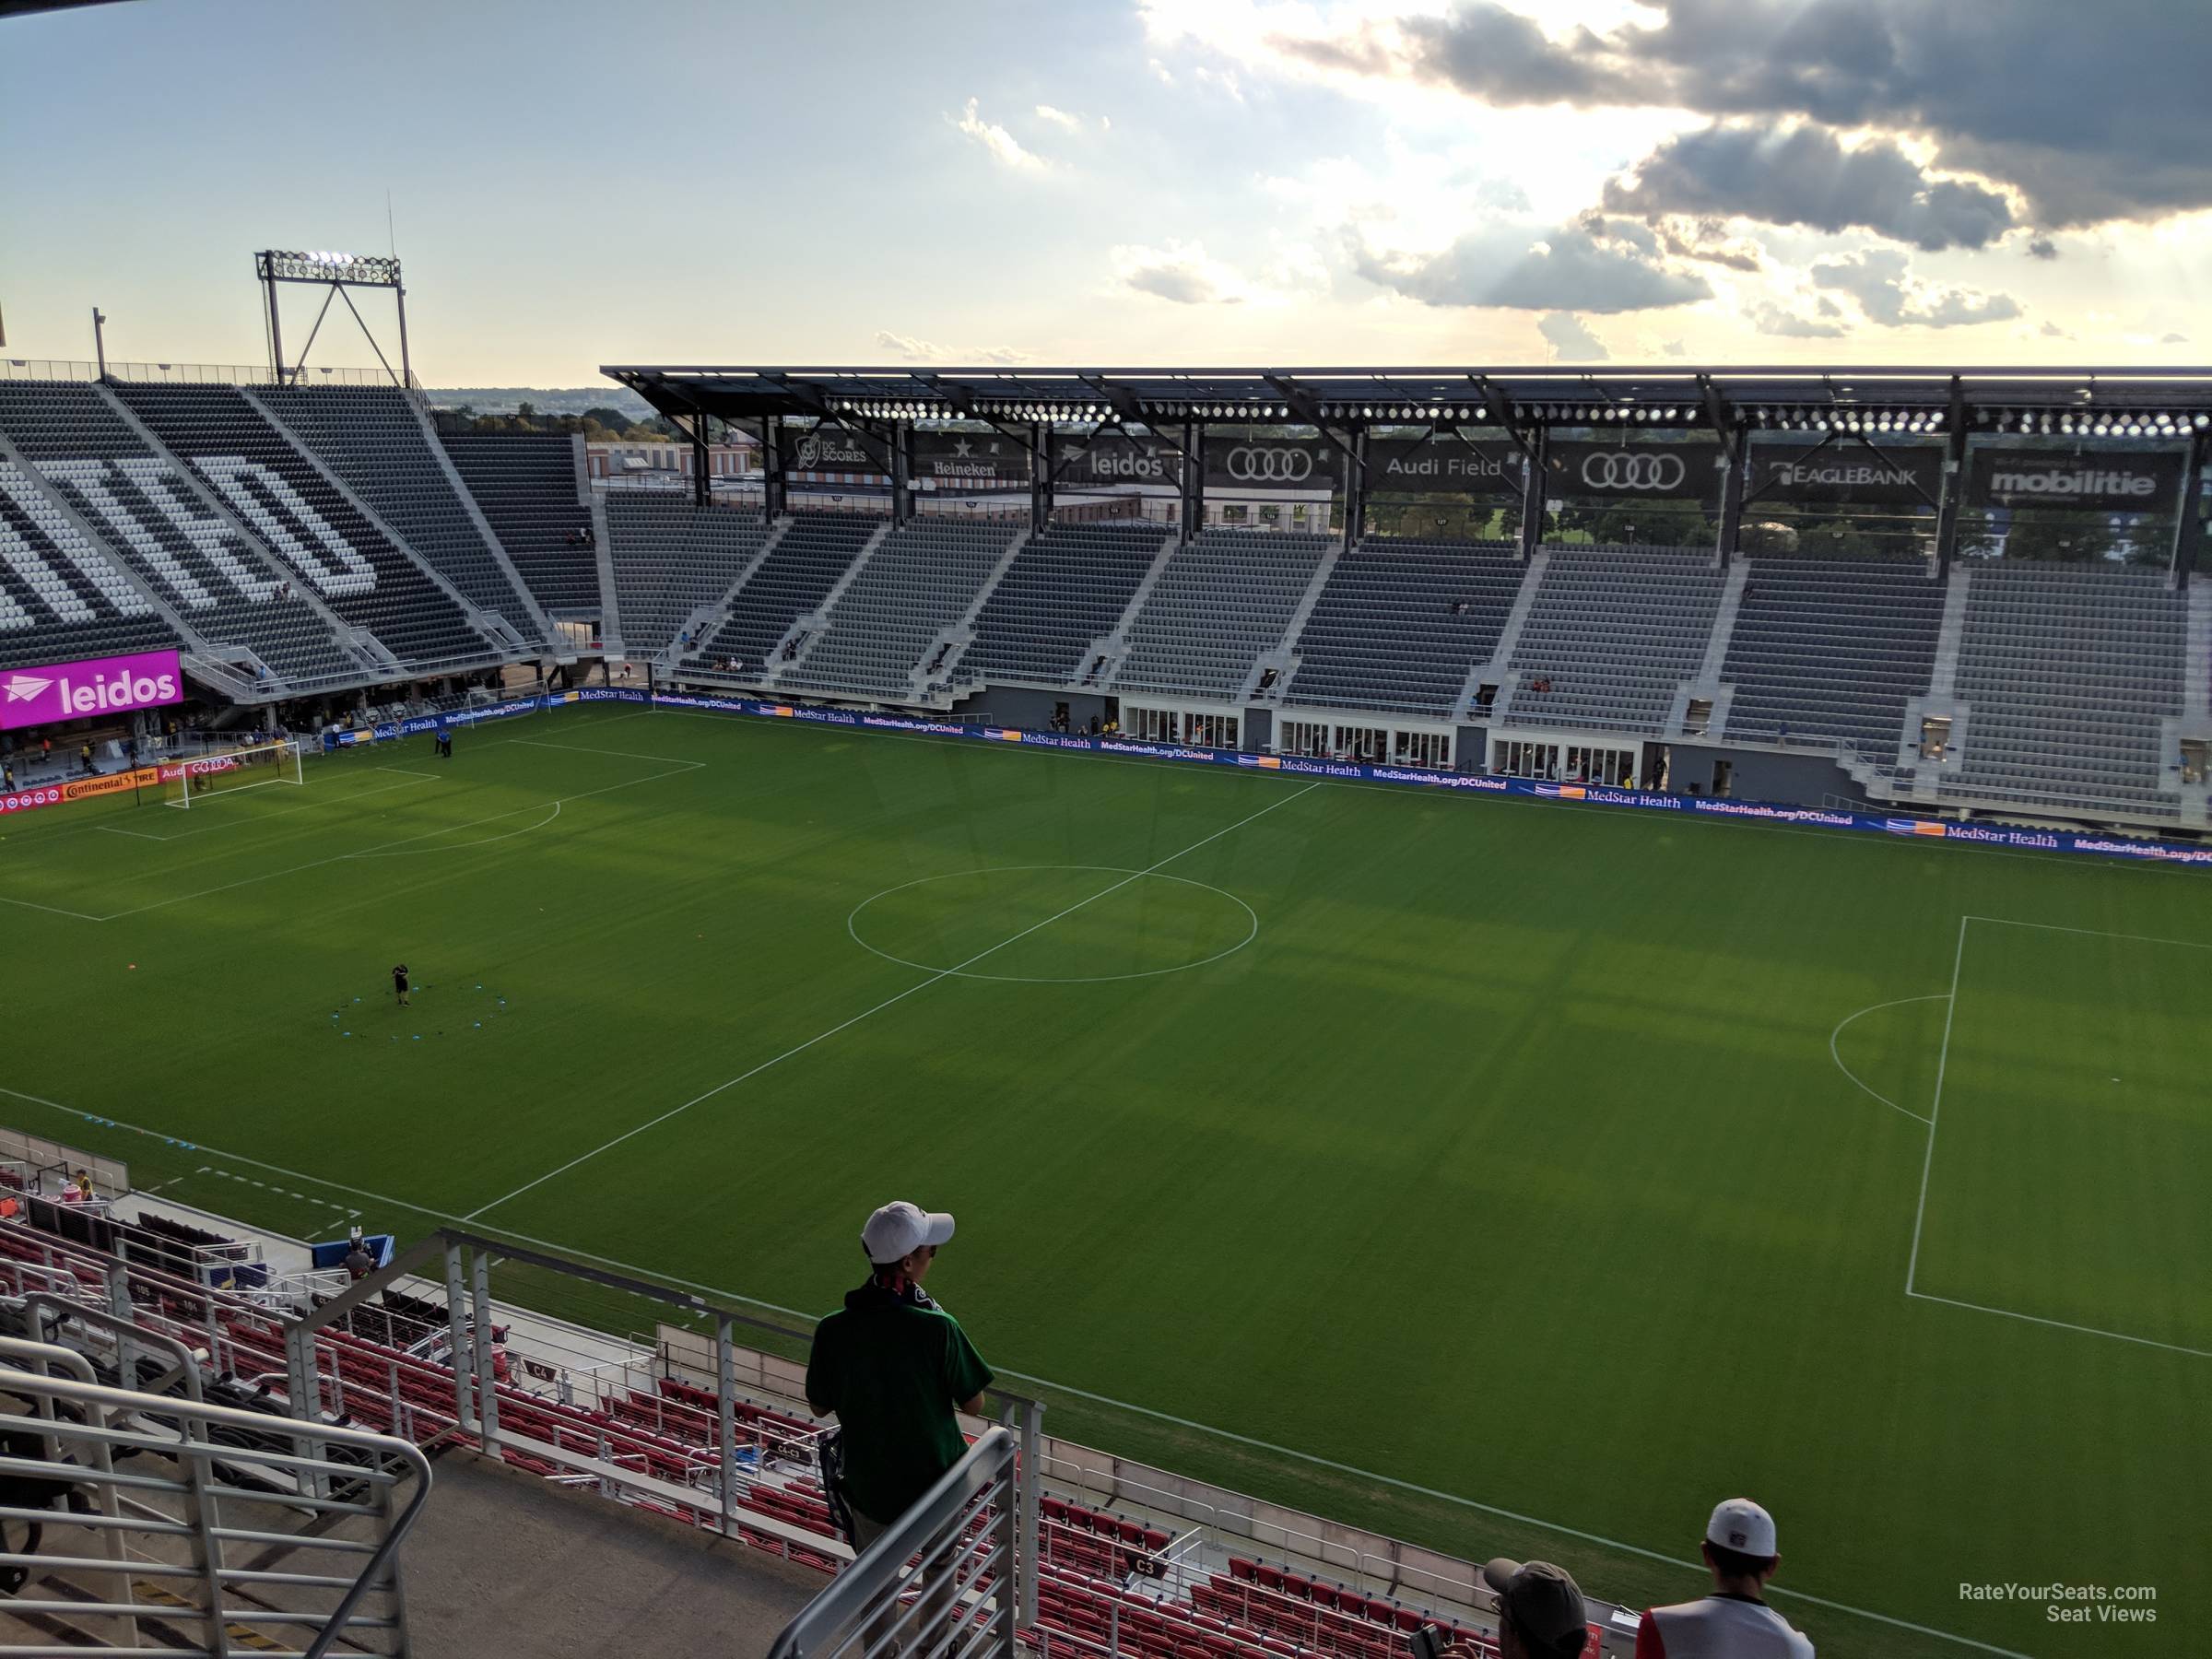 section 203, row 6 seat view  - audi field